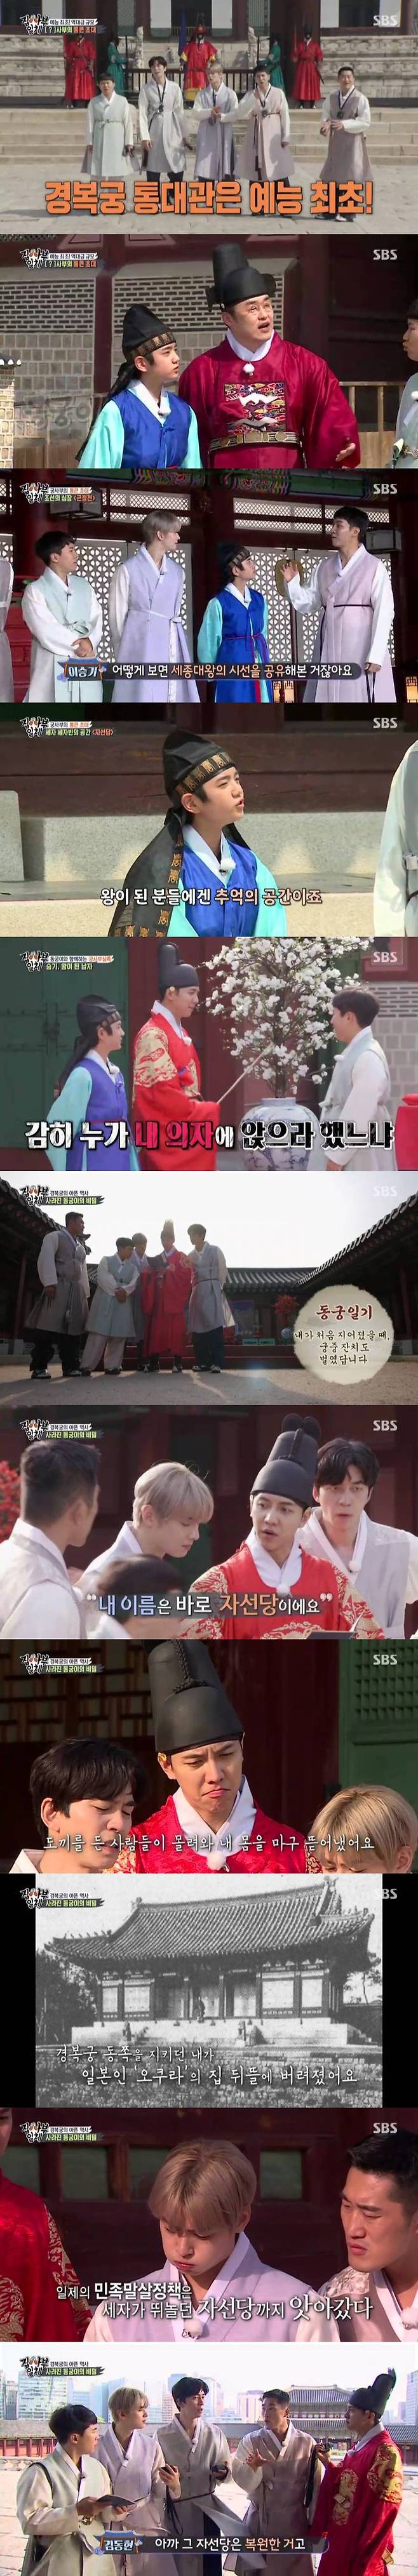 All The Butlers was the first person ever to appear, not a man, Palace (Palace) Master, to capture both fun and meaning.According to Nielsen Korea, a ratings agency on March 3, SBS All The Butlers, which was broadcast on the 2nd, recorded 4.1% of the first part and 4% of the second part.The 2049 target audience rating, which is a topic and competitiveness indicator, rose to 2.1% and the highest audience rating per minute rose to 5.5%.The master who appeared on the show was Gyeongbokgung.In the appearance of the first non-personal master of All The Butlers, the members expressed their feelings, saying, It seems to be the first and best master.In addition, Choi Tae-seong, a Korean history star lecturer, was in charge of history, and Kim Kang-hoon, a child actor, was accompanied by Goodbye My Princess.Especially, this filming was the first time that the entire Gyeongbokgung was licensed, and it was opened to the inside of the Geunjeongjeon and the second floor of the gyeonghoeru which can not be easily entered.Members looked back at Gyeongbokgung following Choi Tae-seong and Goodbye My Princess.Choi Tae-seong said: If you look well there are stories of many people who lived here in the building.I think meeting the story is the will of Master Gyoungbokgung. Members looked inside the Geunjeongjeon and from gyeonghoeru to the Charity Party and the Guncheong Palace.Choi Tae-seong explained about the palace as the space where the Chest sick Empress Myeongseong was killed and the members said Suddenly Chest is sick.Goodbye My Princess also said, I think it was too scary, I learned it from textbooks, but it is even worse when I come.Lee Seung-gi said, I thought it was a splendid place with a king, but it seems to be a place where people live in the end.While continuing to spend time at Gyeongbokgung, Goodbye My Princess, who was with the members, suddenly disappeared and embarrassed everyone.At this time, an unrelated person appeared with a diary of Goodbye My Princess, Please find Goodbye My Princess with these clues.Goodbye My Princess must be in Gyongbokgung. The diary read, I am called Goodbye My Princess, the palace built in 1427, the palace in the east.The members found out that Goodbye My Princess was not a person but a charity party.The members followed the diary clues to the charity party, where a second diary was placed in front of the charity party, which contained a shocking past that the Japanese auctioned Gyoungbokgung.The members said, It was about 100 years ago, and they could not easily say, I did not know that Gyeongbokgung was auctioned and torn it to Japan.Since then, the members have been looking for the original charity hall and heading to the backyard of the palace, but there was only a place left.Choi Tae-seong told the Chest sick story of the philanthropy being reduced to a Japanese private art museum as the gyeongbokgung pavilions were auctioned off.In 1923, the Kanto earthquake caused the charity to eventually disappear into a fire.After that, Professor Kim Jung-dong, who tried to rebuild his bitter history without forgetting, told the back story that he was able to return the neglected stone to Gyongbokgung.In addition, Choi Tae-seong told everyone that the backyard of the Guncheong Palace, which moved the charitable hall, was a place where Empress Myeongseong was buried and burned.Shin Sung-rok said, If we did not know this, we would just see it even if we came to Gyongbokgung.Choi Tae-seong said, Before the stonework of the charity party came back, the history of the charity party was erased.I recovered this and restored the story of the Charity Party by putting it back. It is our mission to restore the lost history by finding one by one, restoring the lost story, and to pass on to the future.This is the teaching of Master Gyeongbokgung. Following the painful history of Chest, which was hidden on this day, the scene of the teachings of Master Gyeongbokgung reminded me of the meaning and took the best one minute with 5.5% per minute.